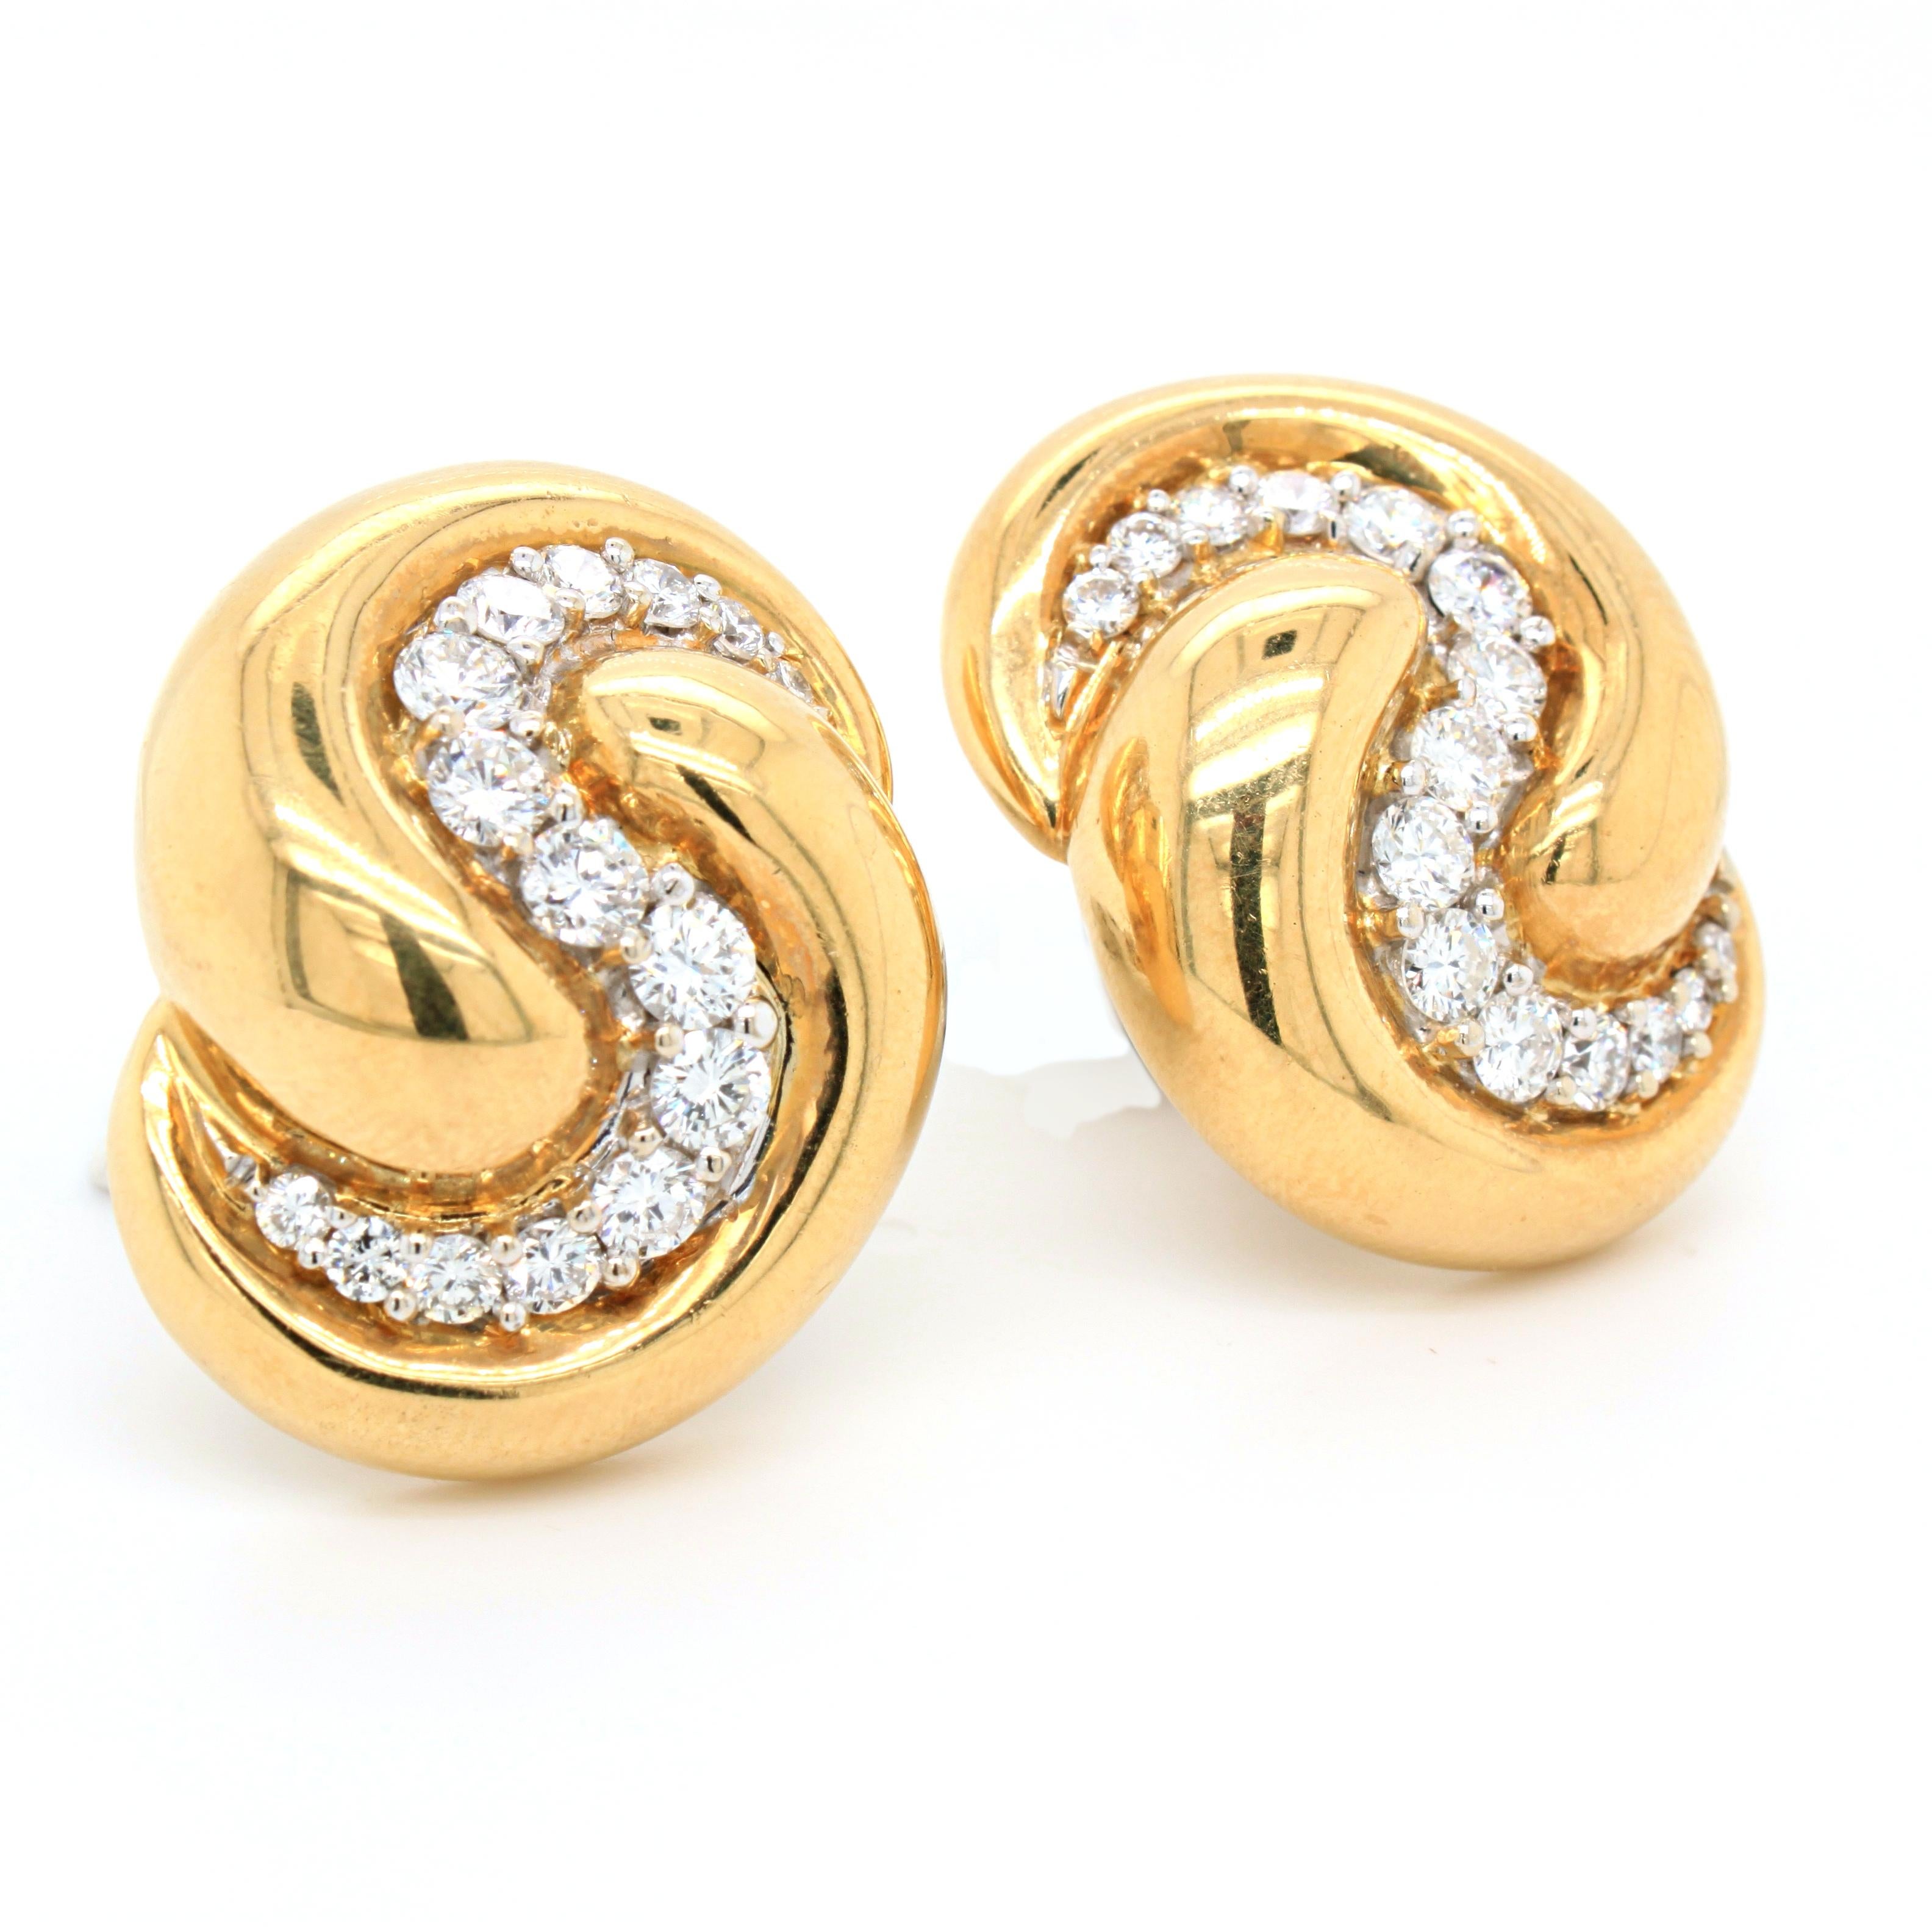 Diamond and gold bombé earrings in 18k yellow gold. 
The earclips are designed in an S-shape with a round brilliant cut diamonds in the centre of the design flow, whereas the diamonds are of extremely fine quality (D/E colour and IF/VVS clarity),